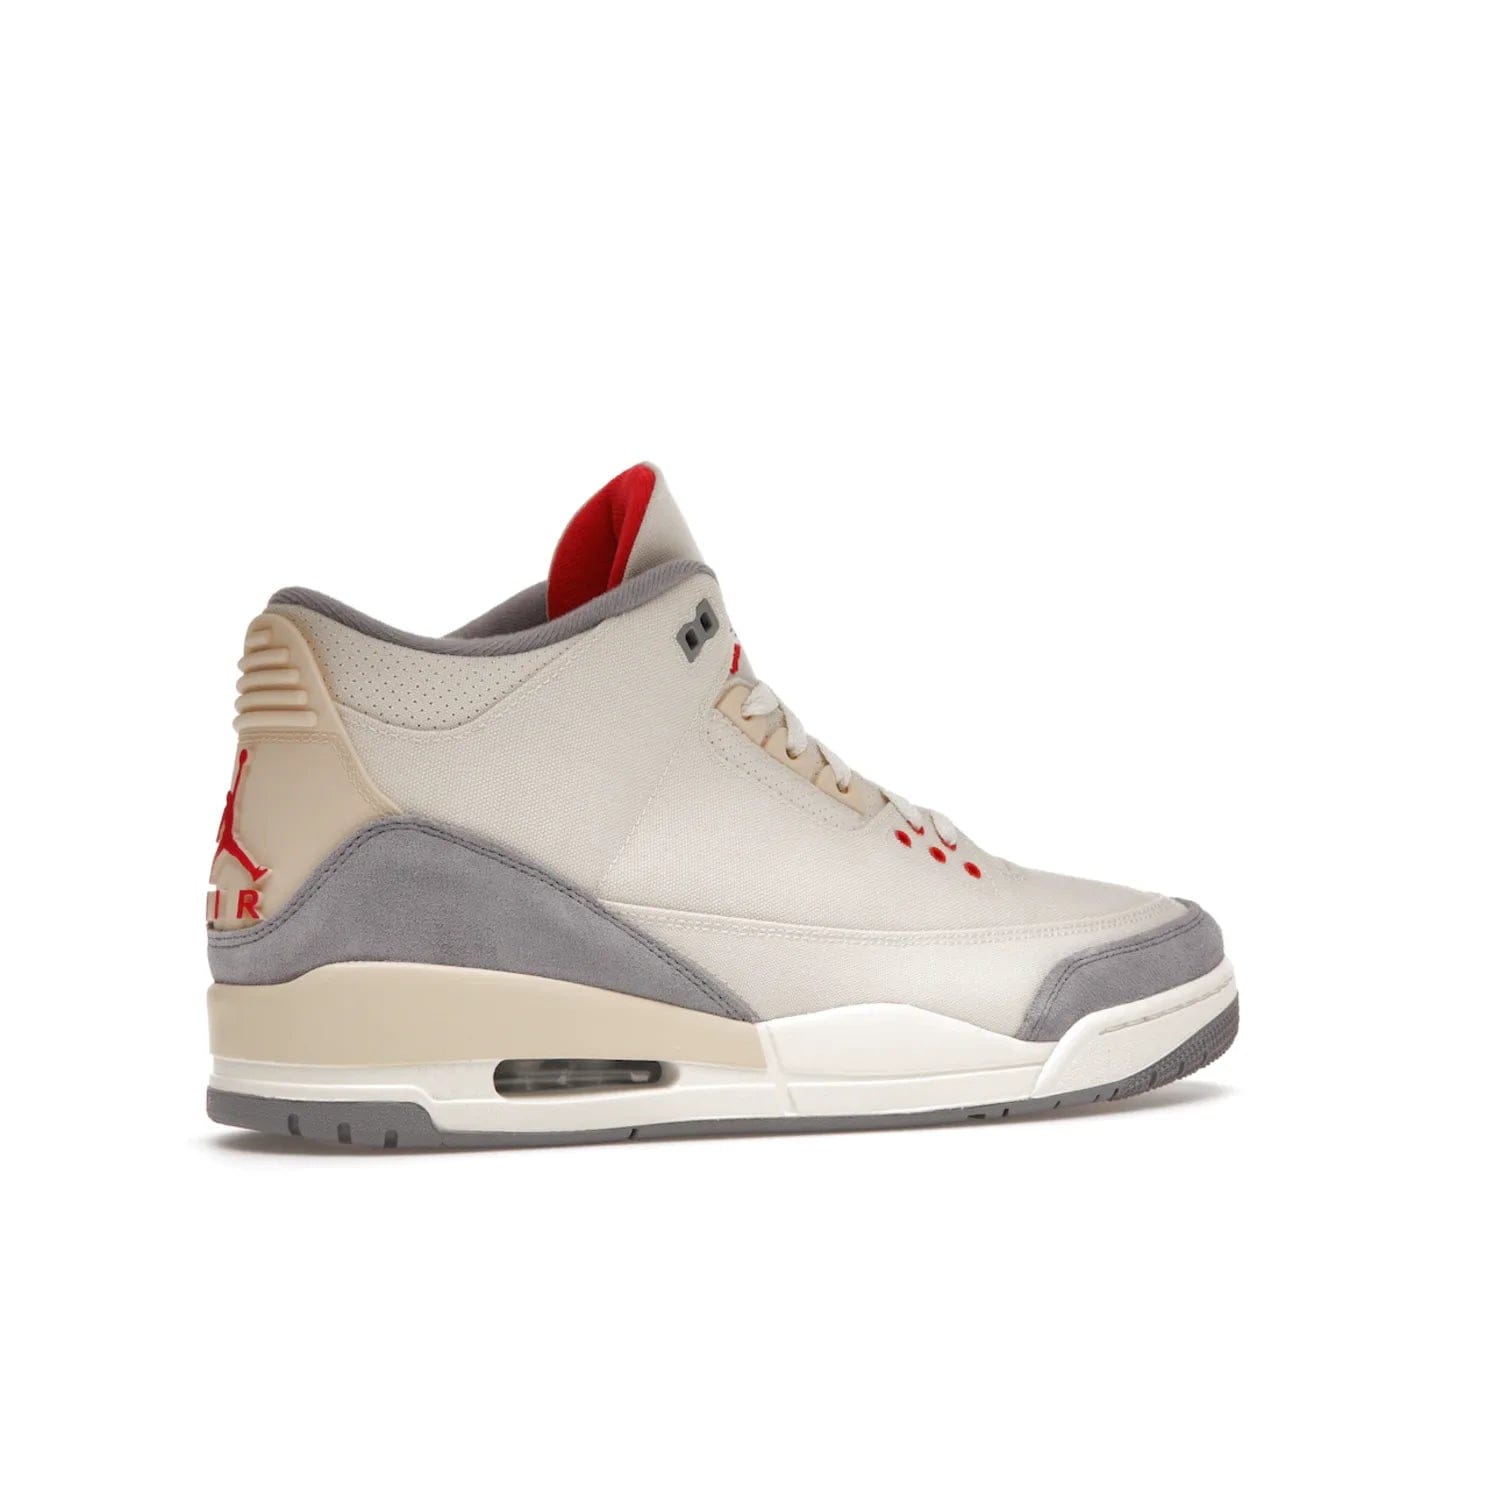 Jordan 3 Retro Muslin - Image 34 - Only at www.BallersClubKickz.com - Eye-catching Air Jordan 3 Retro Muslin in a neutral palette of grey, cream, and red. Featuring canvas upper, suede overlays and white/grey Air Max sole. Available in March 2022.